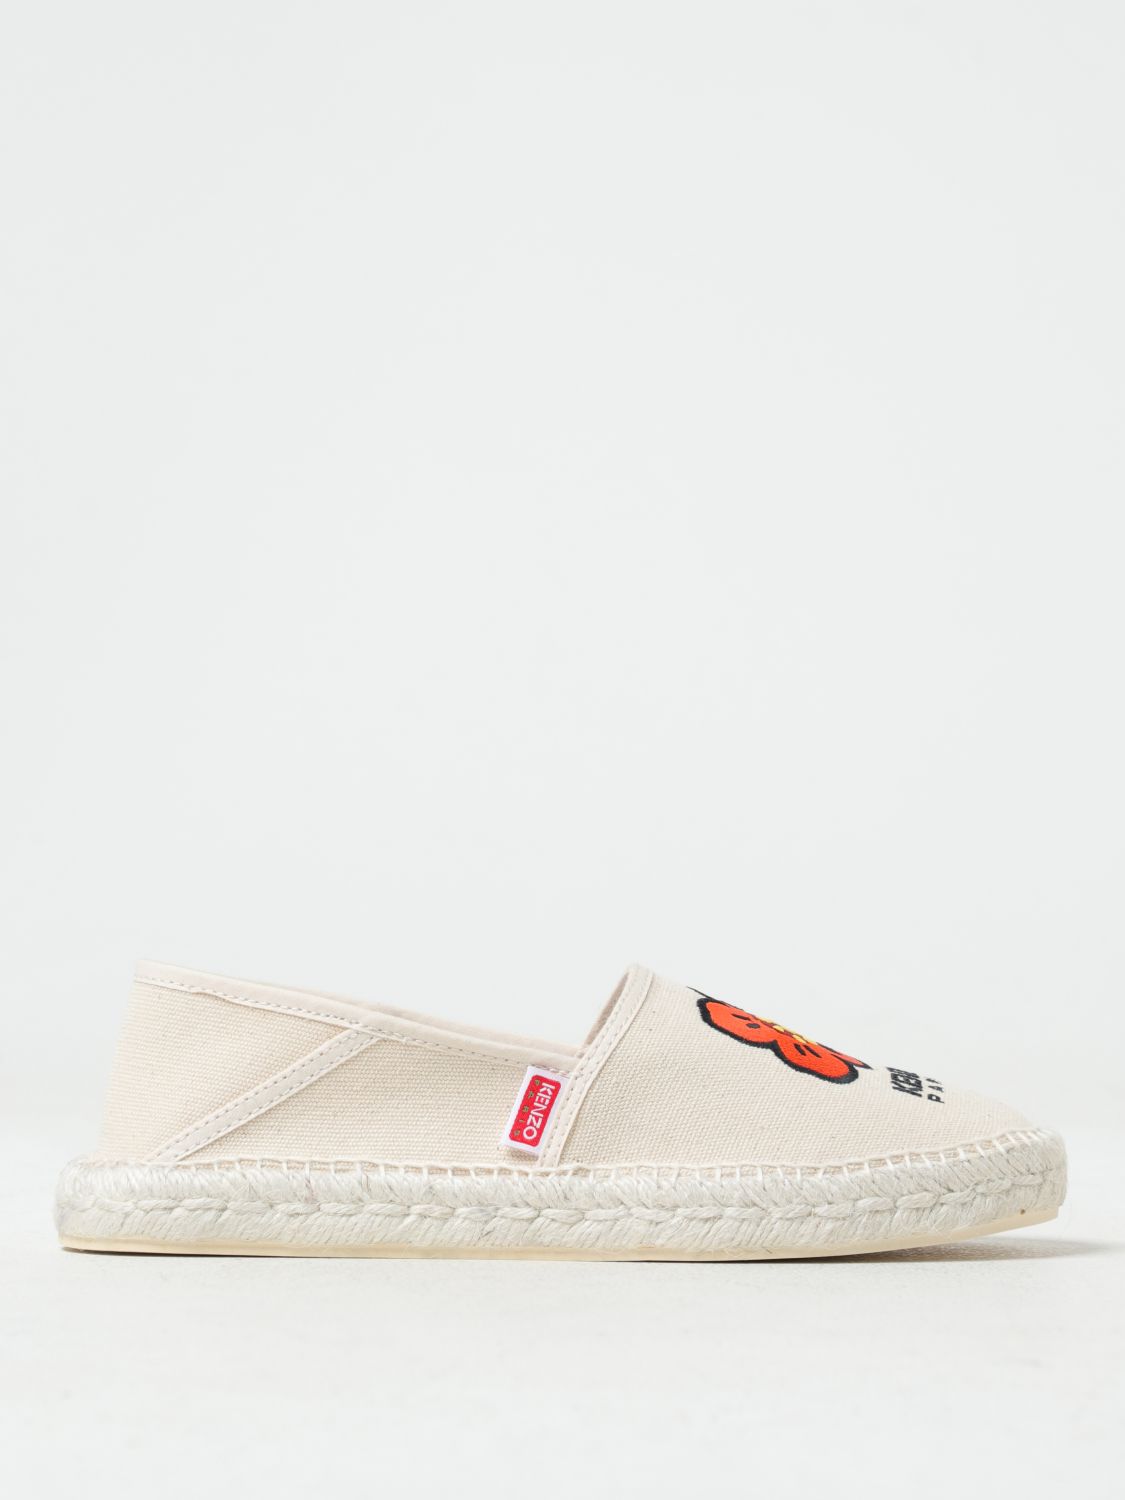 KENZO FLOWER ESPADRILLES IN CANVAS WITH EMBROIDERED LOGO,E74016001